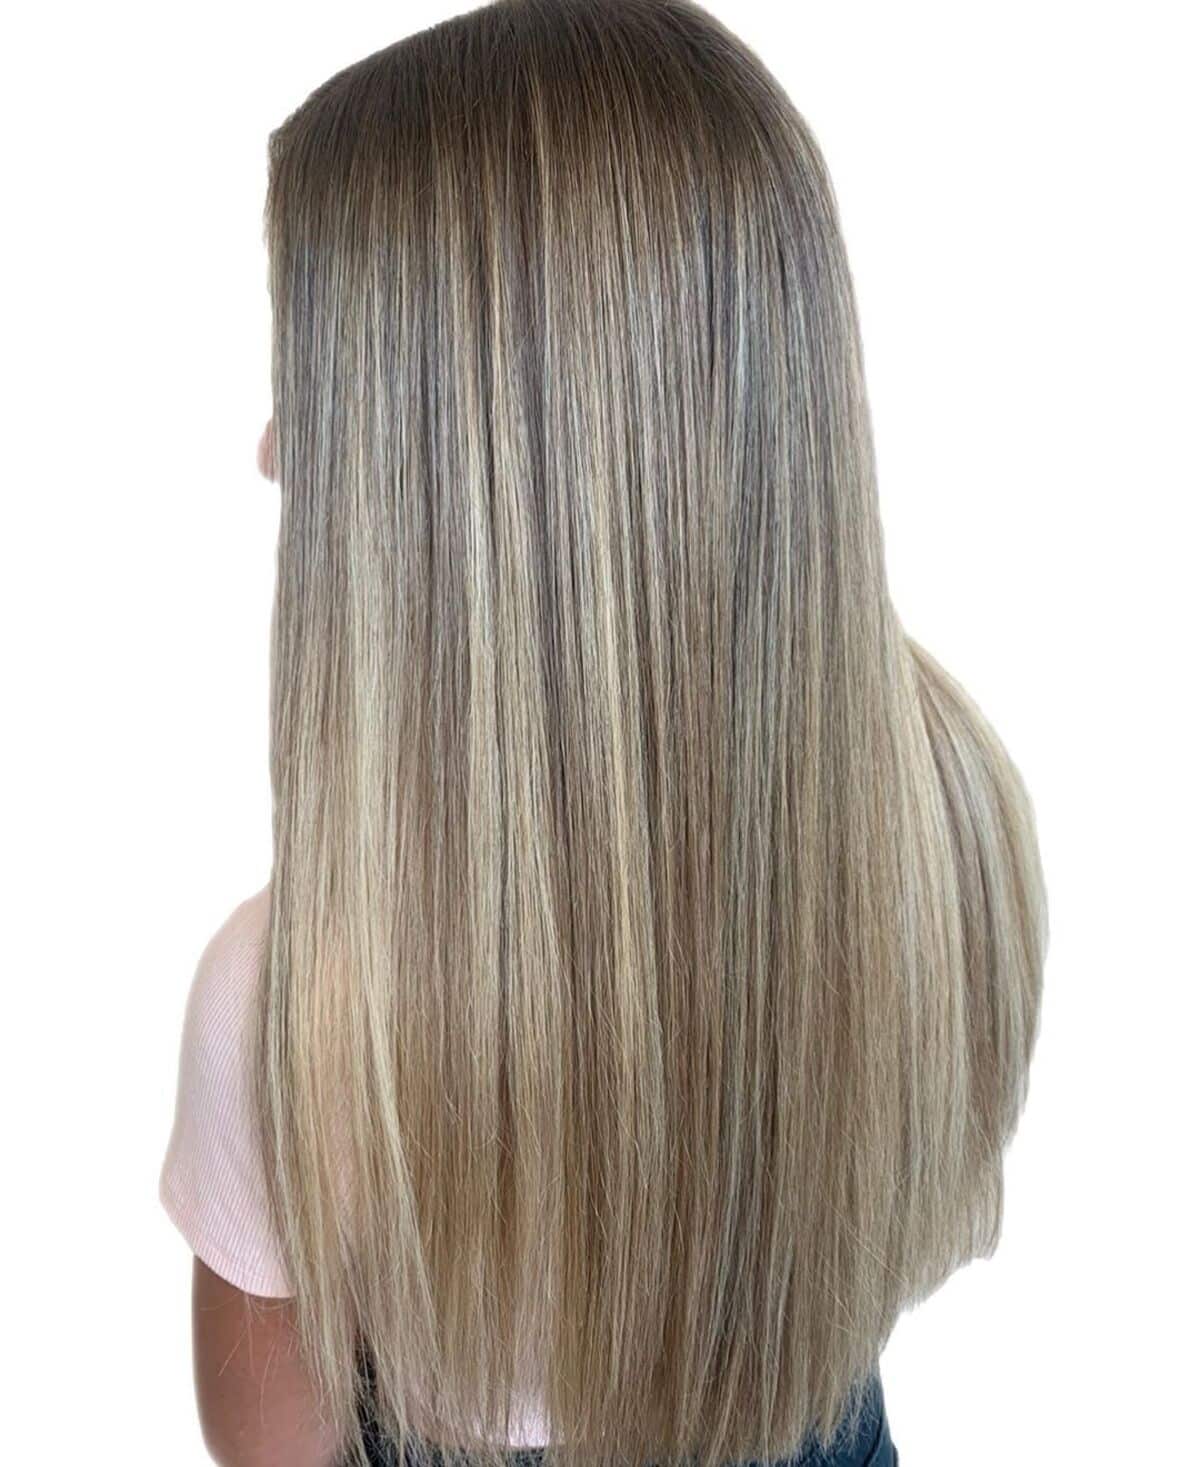 18 Best Ways to Get Light Blonde Highlights Right Now